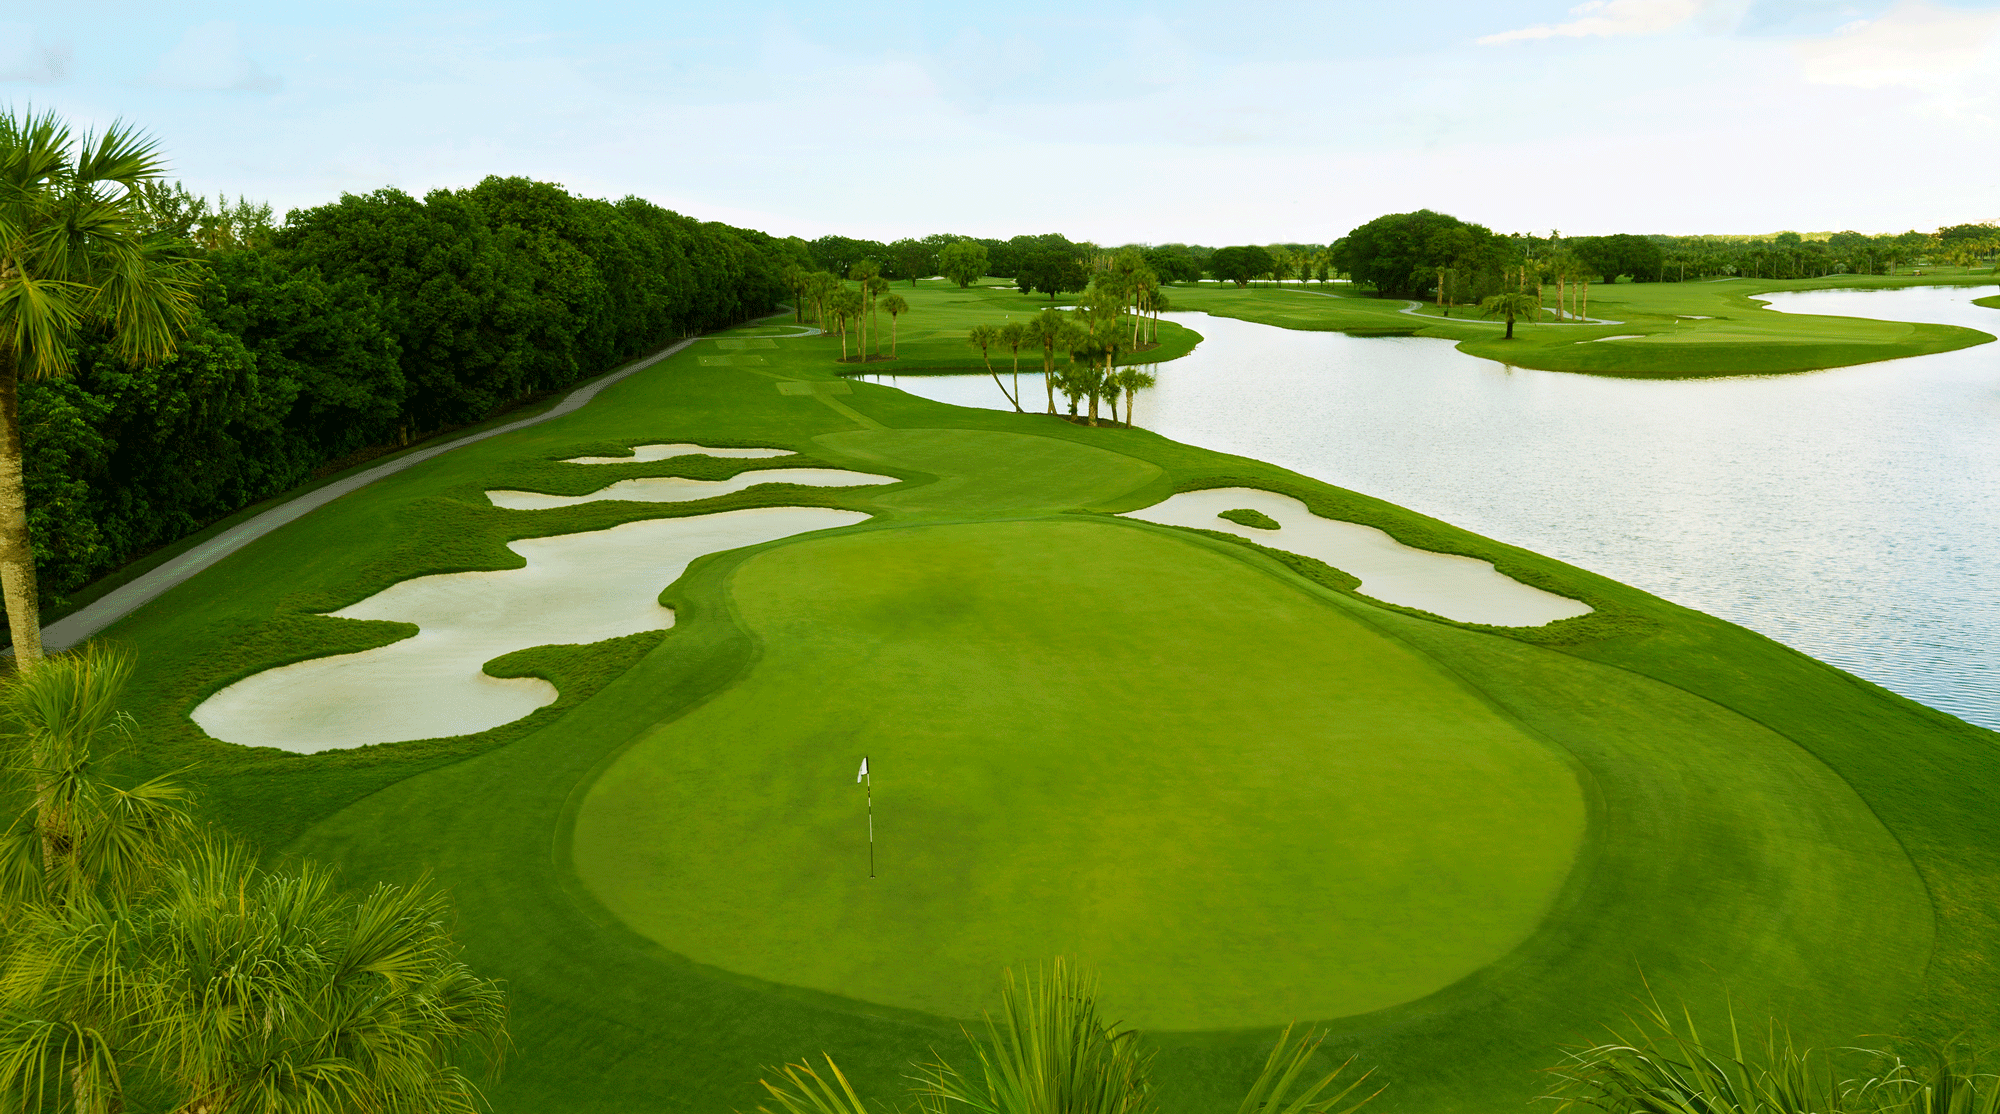 The scenic Golden Palm course at Doral.